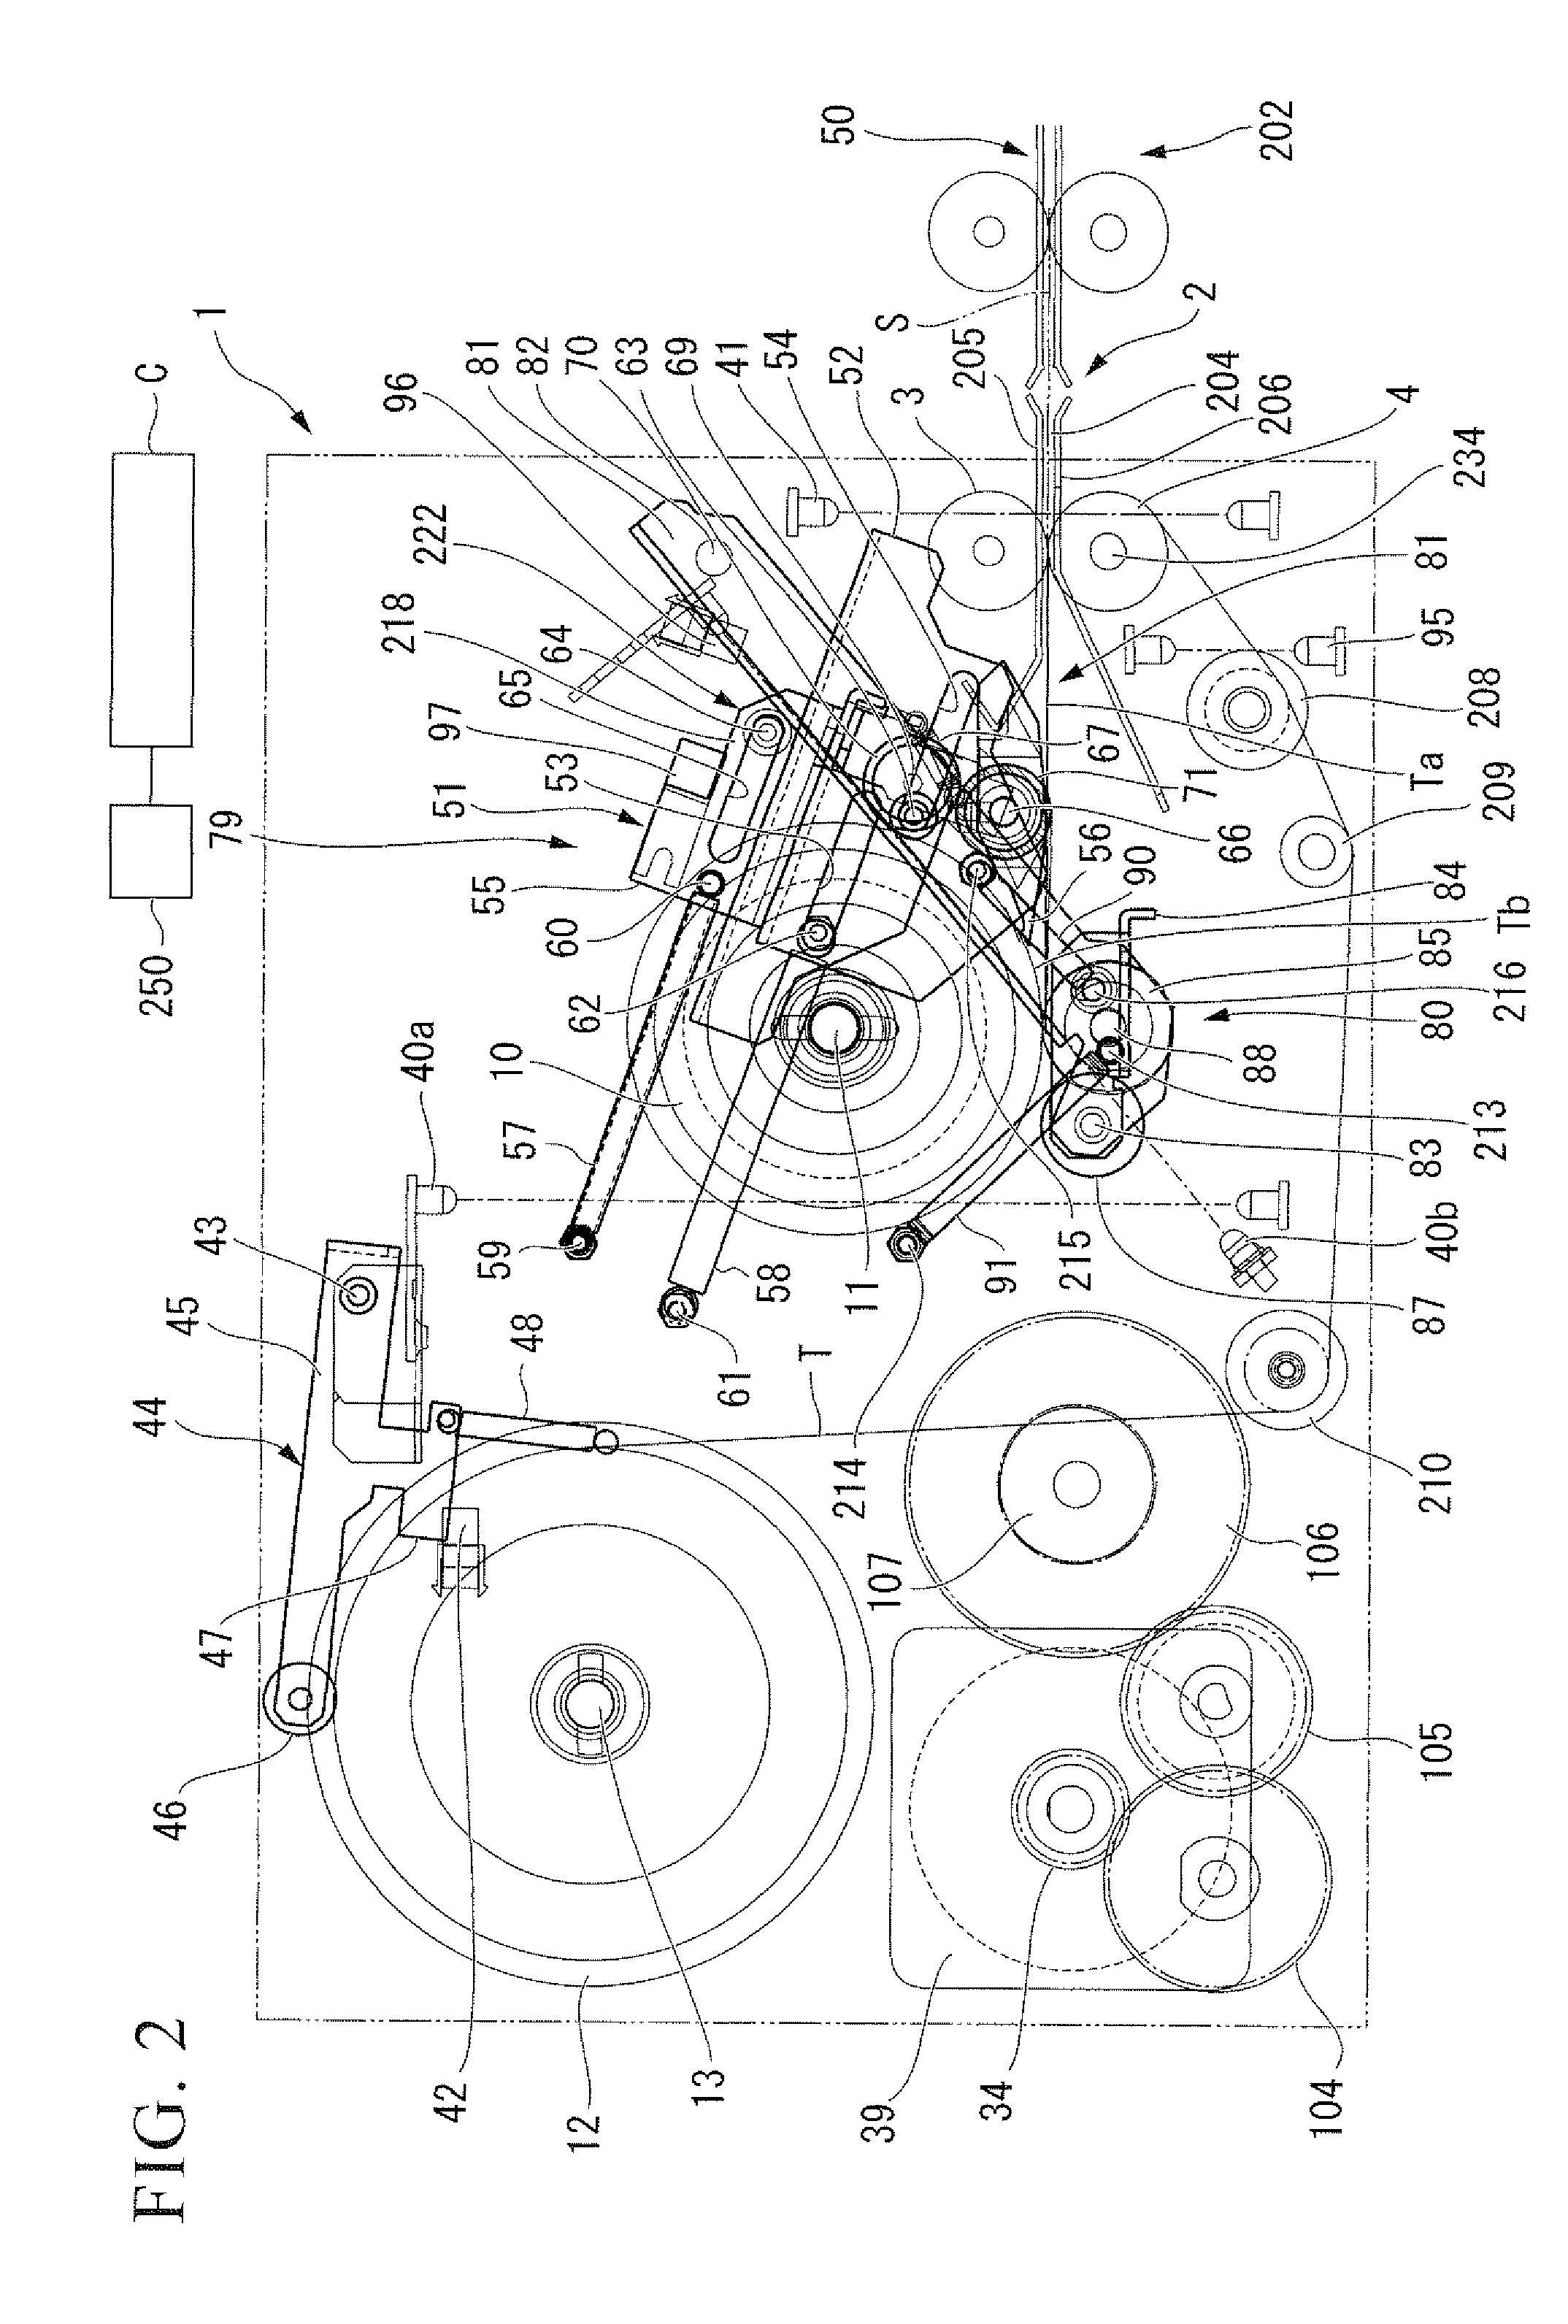 Sheet paper storage and dispensing device